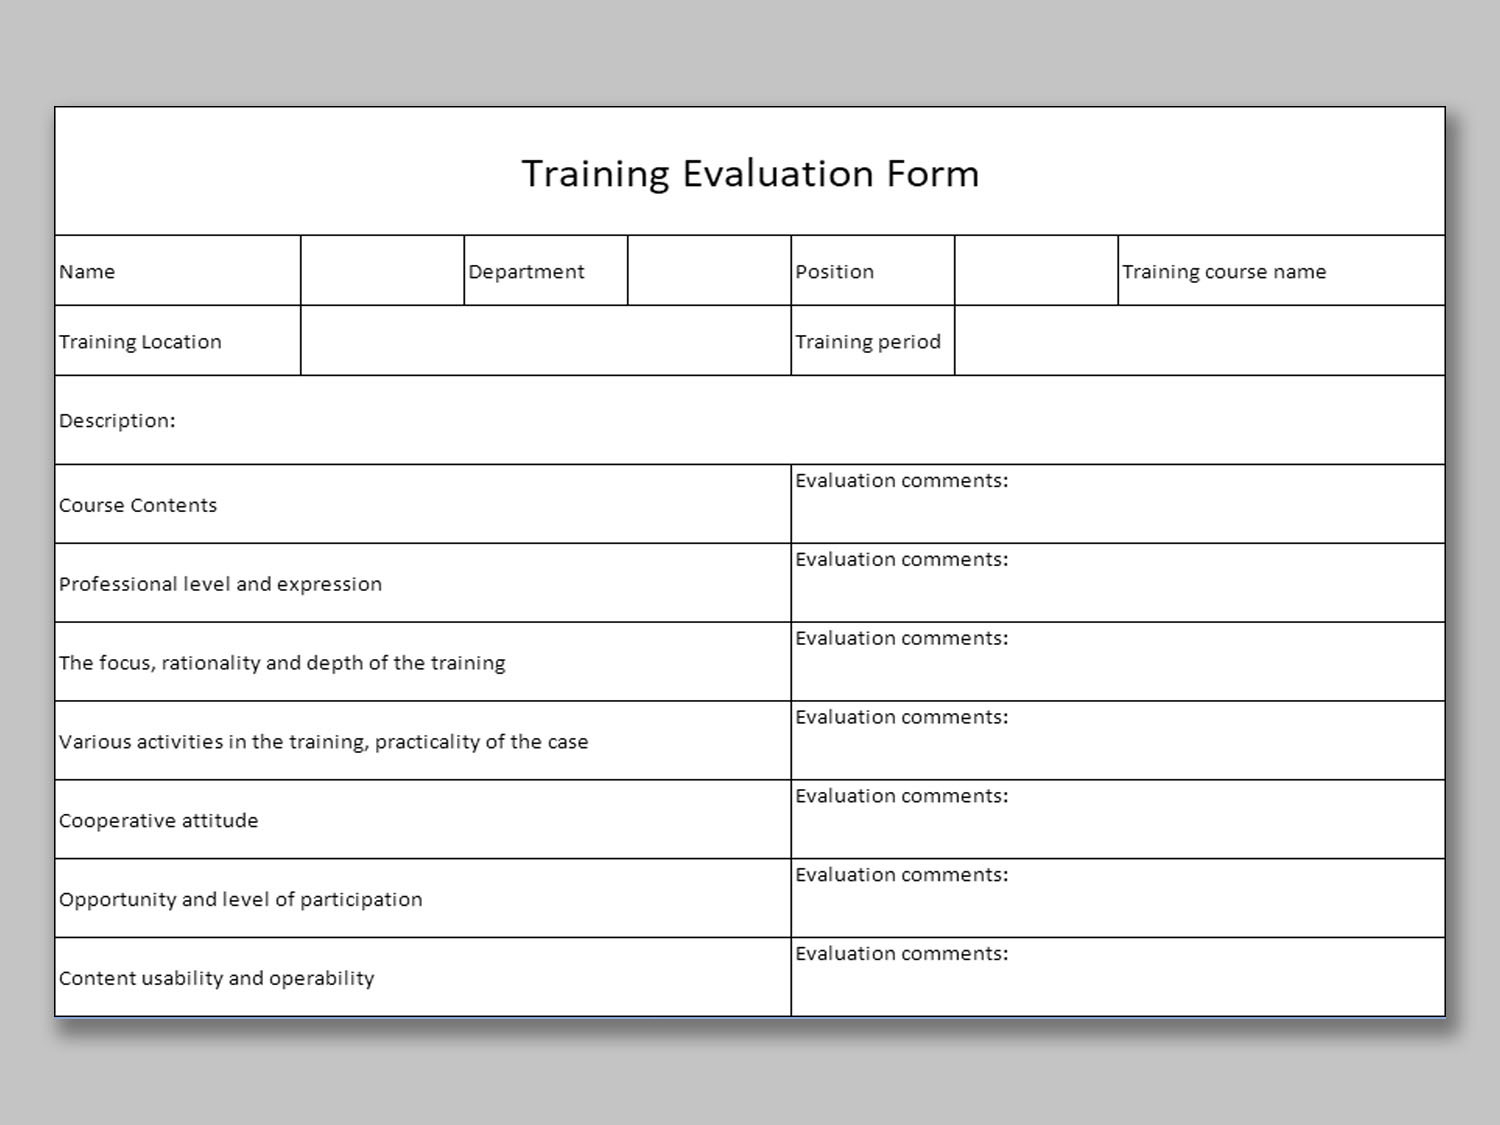 EXCEL Of Training Evaluation Form